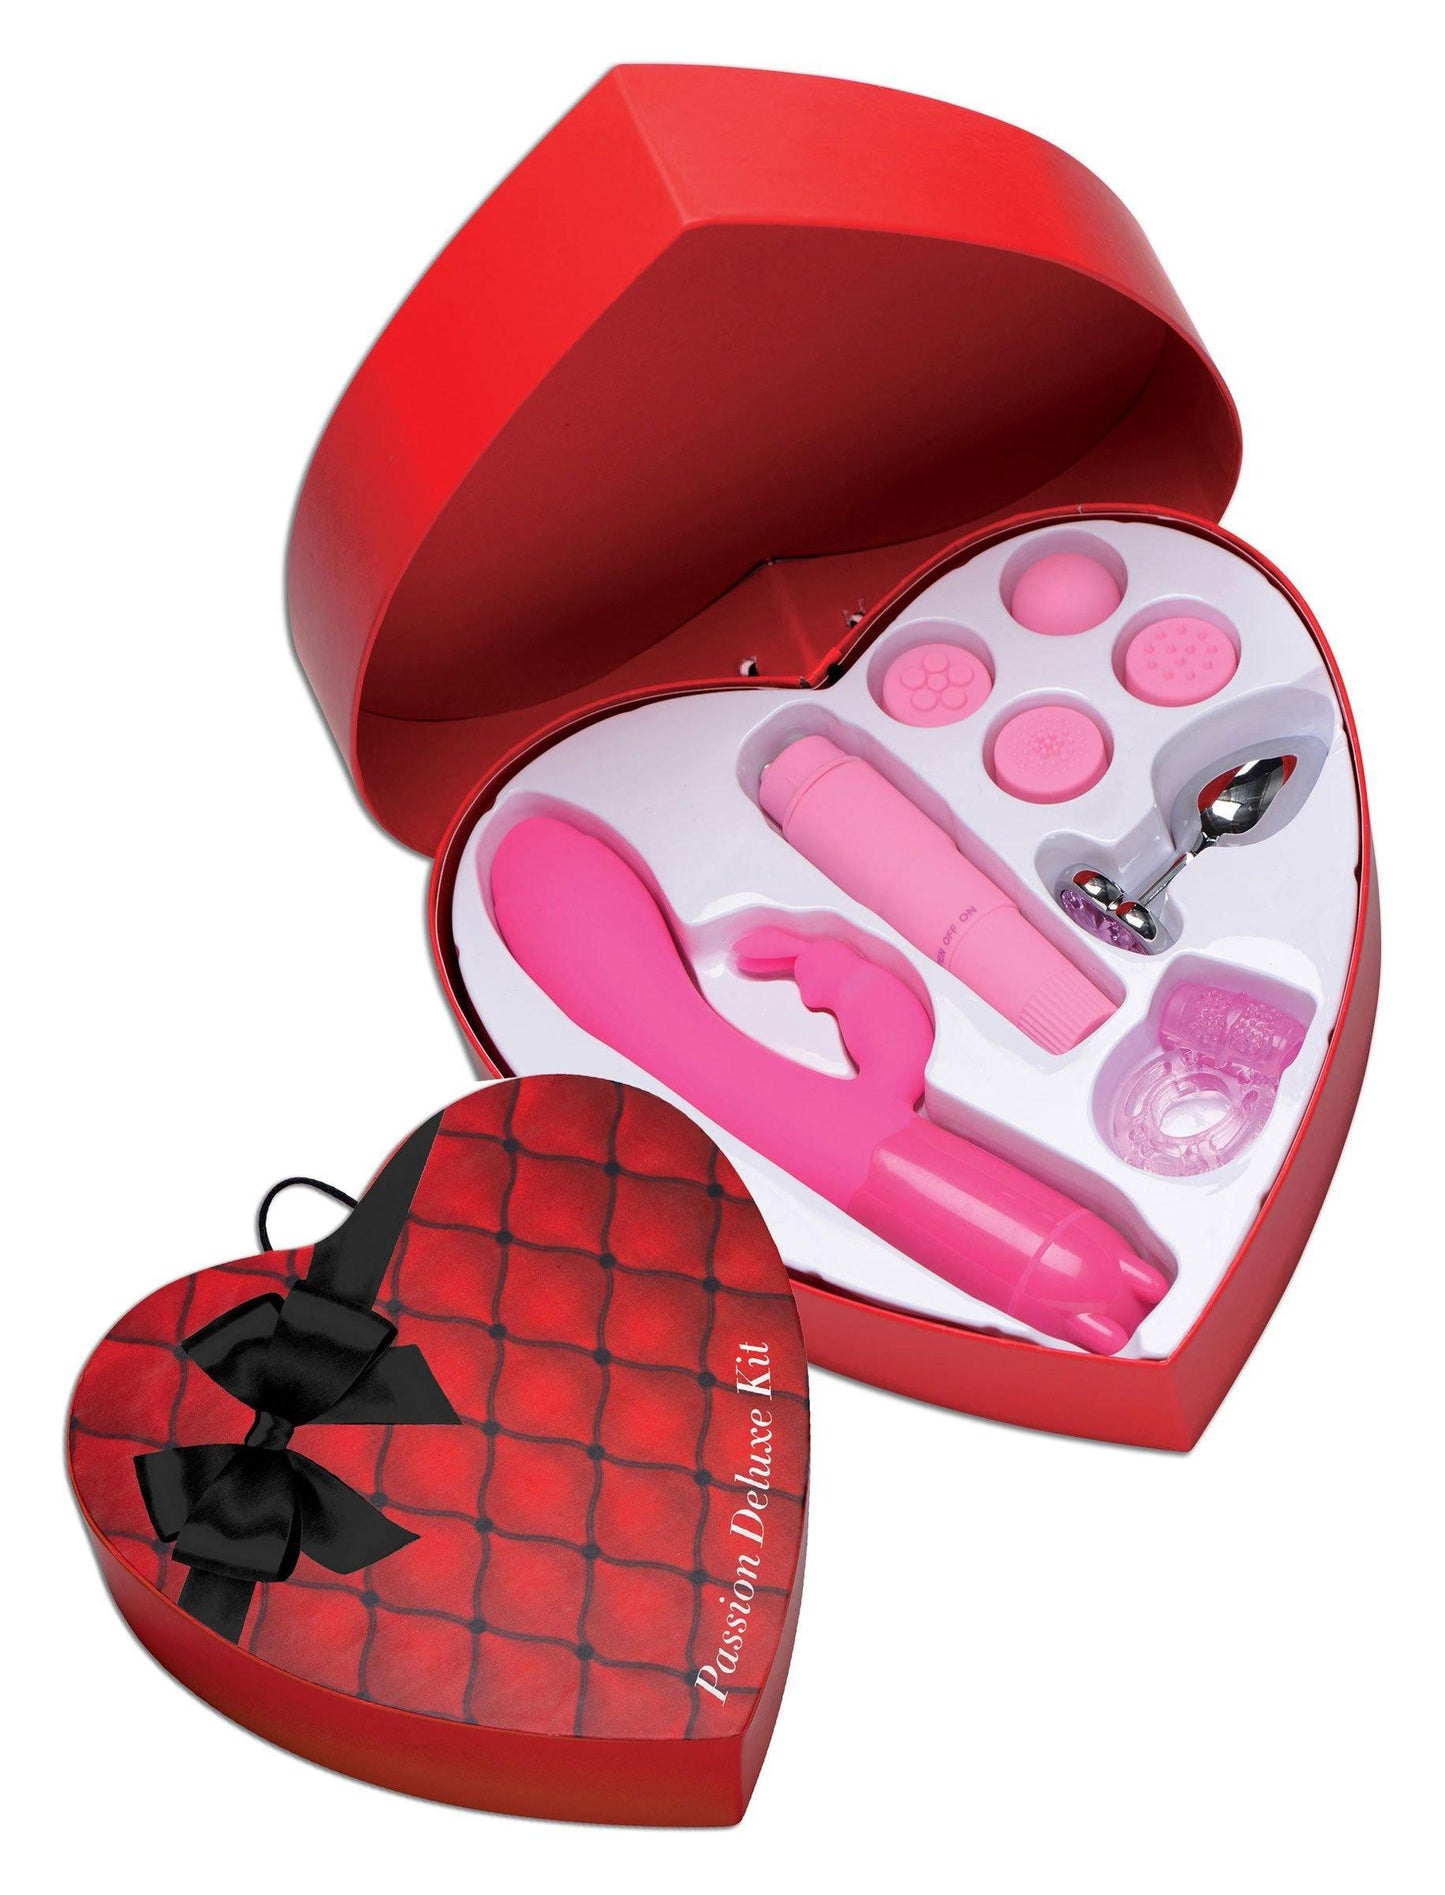 Passion Deluxe Kit - My Sex Toy Hub